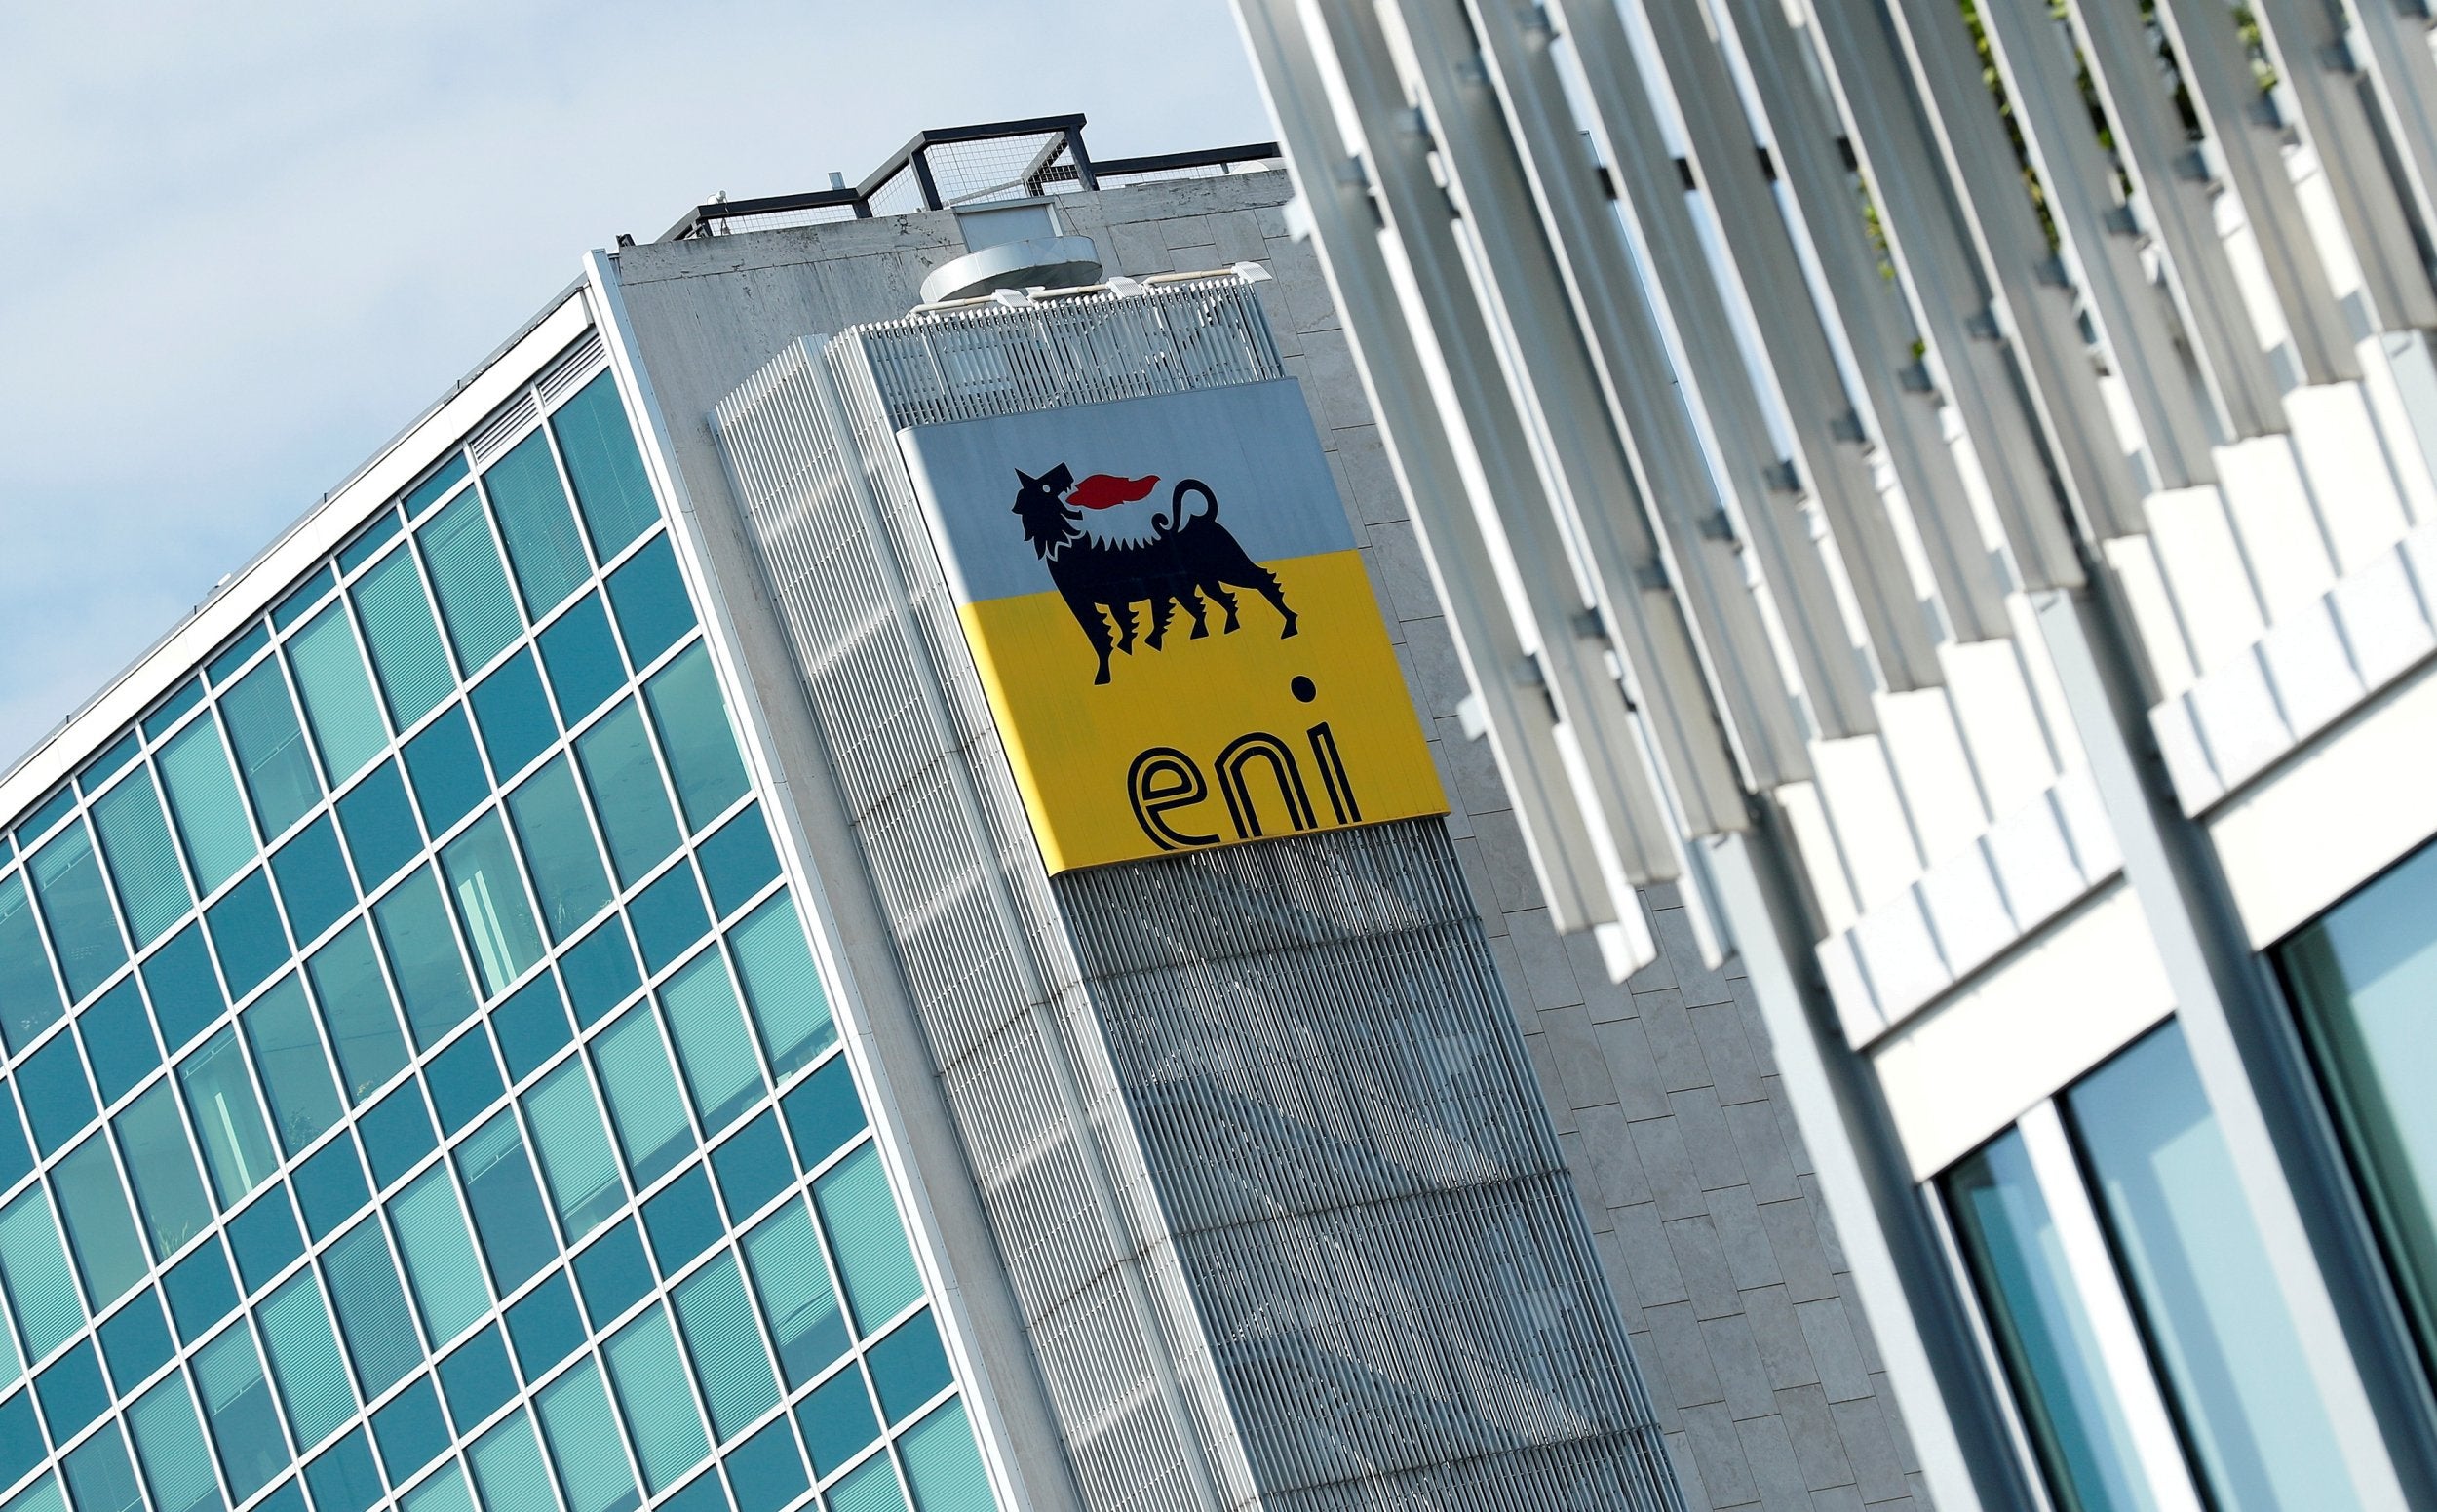 Italian oil giant Eni is on trial over alleged corruption